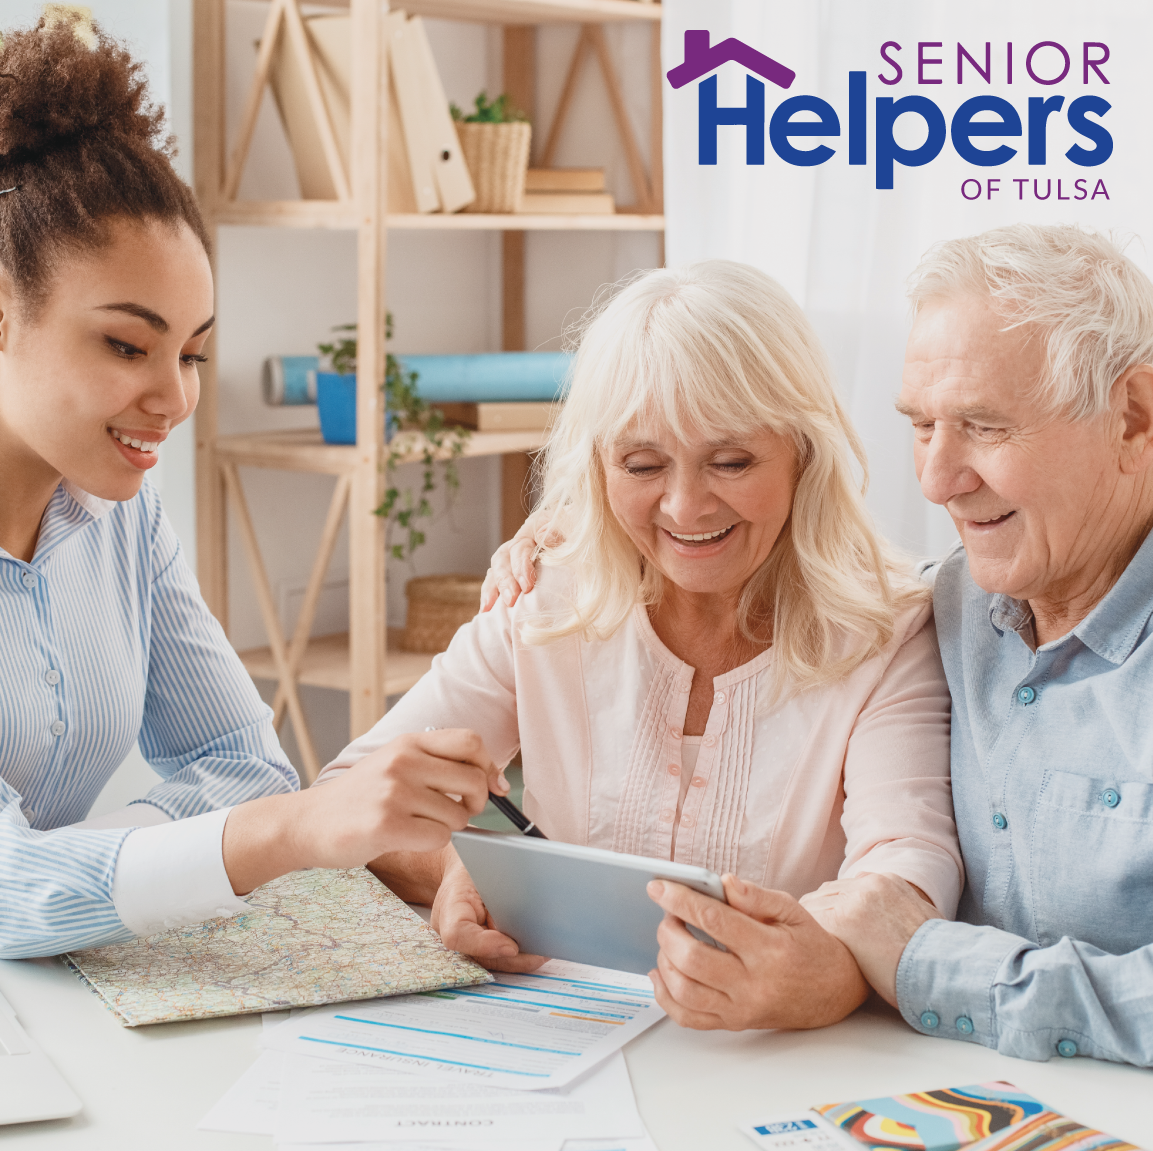 By starting your care journey with Senior Helpers and our LIFE Profile assessment, our clients, families, and care providers benefit from an effective care plan proven to lower overall safety risk, increase autonomy, and improve quality of life.